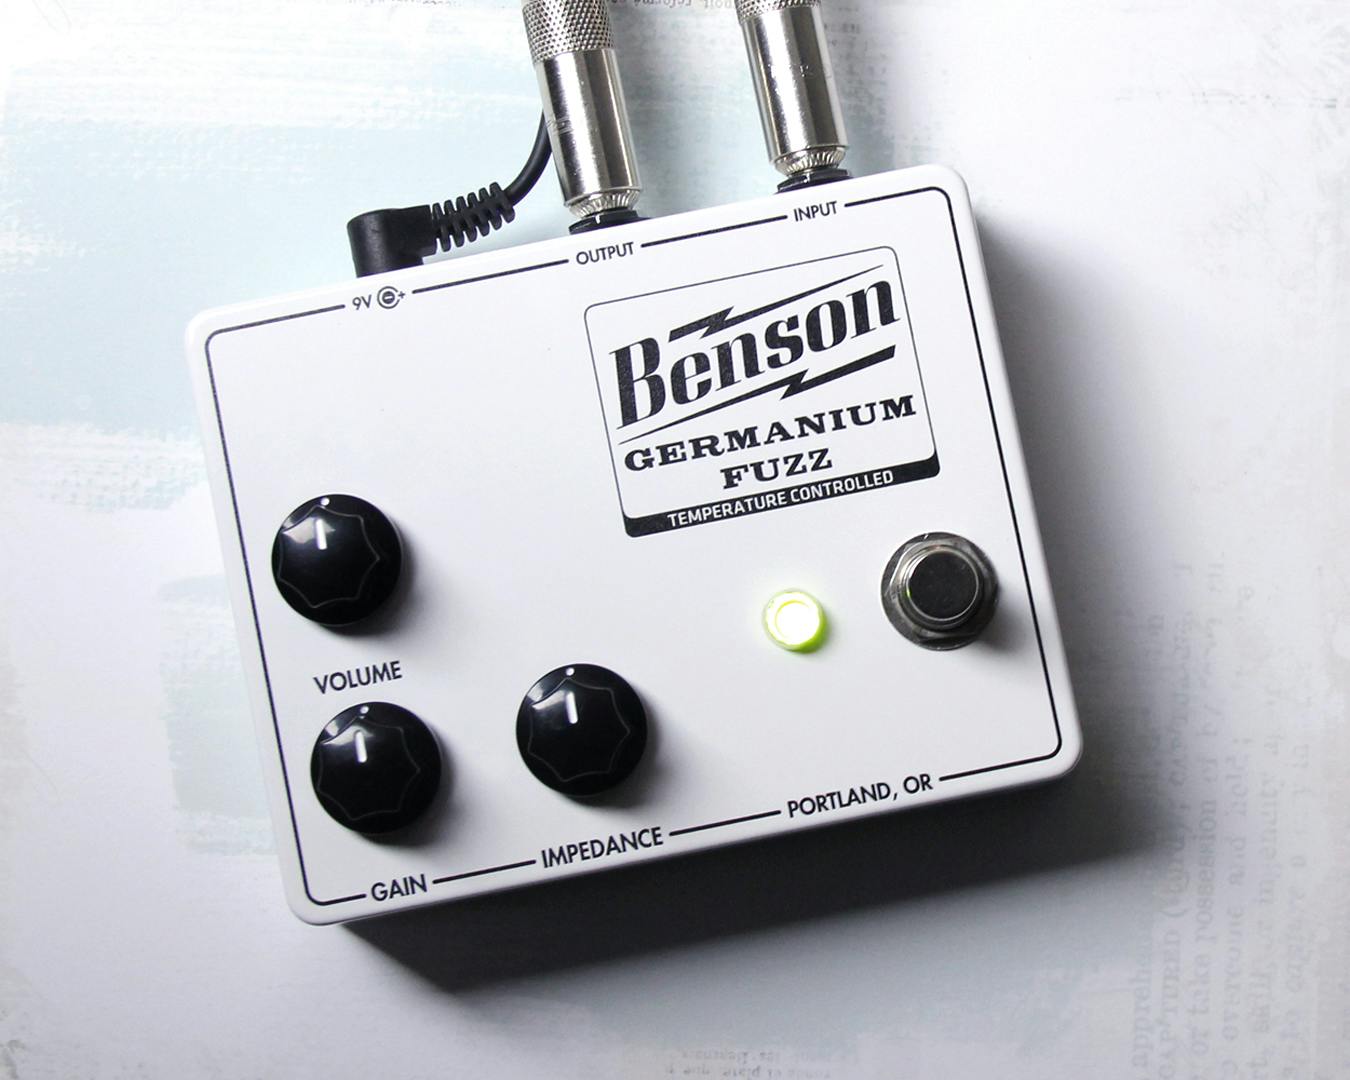 Benson Amps Temperature-Controlled Germanium Fuzz Pedal in Solar White -  Andertons Music Co.